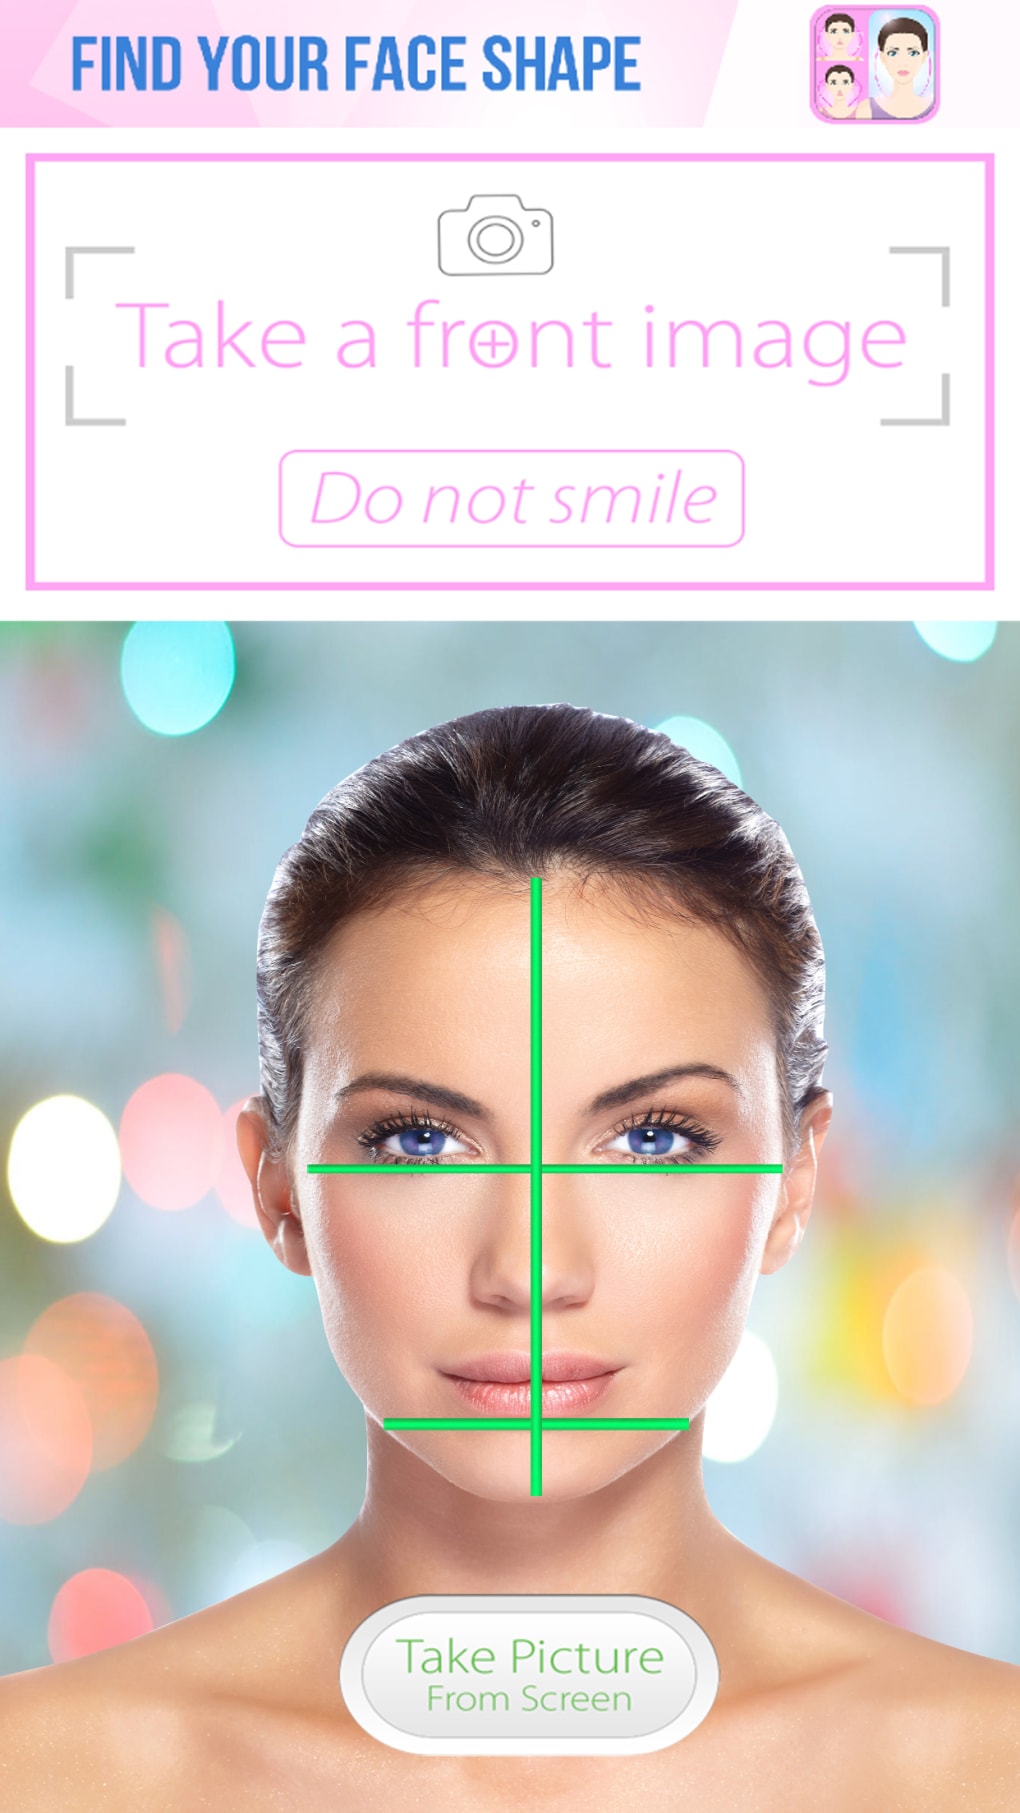 Find Your Face Shape for iPhone - Download